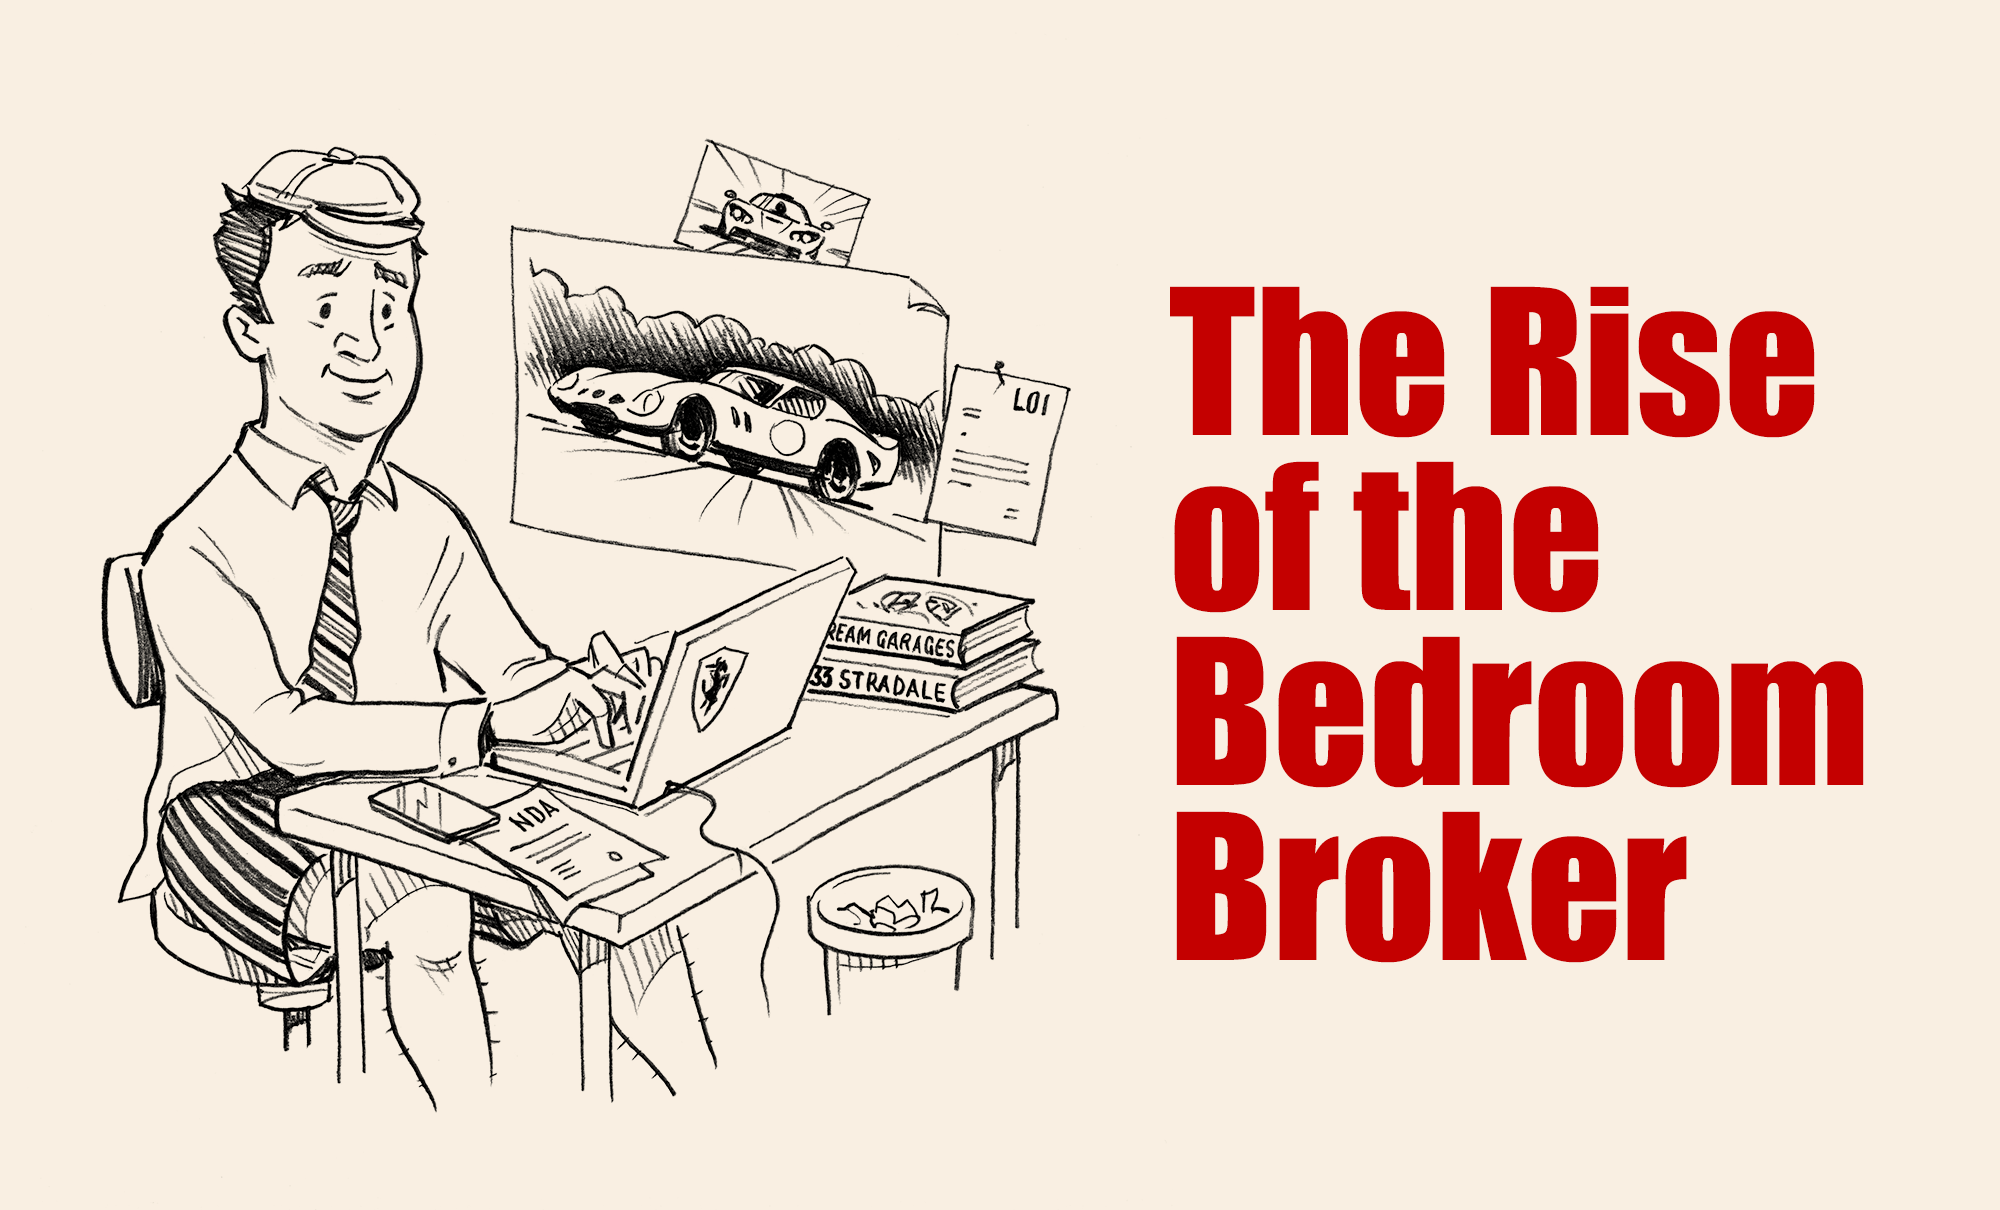 The rise of bedroom brokerage. Or, “Mum, not now, I’m sending an email!”